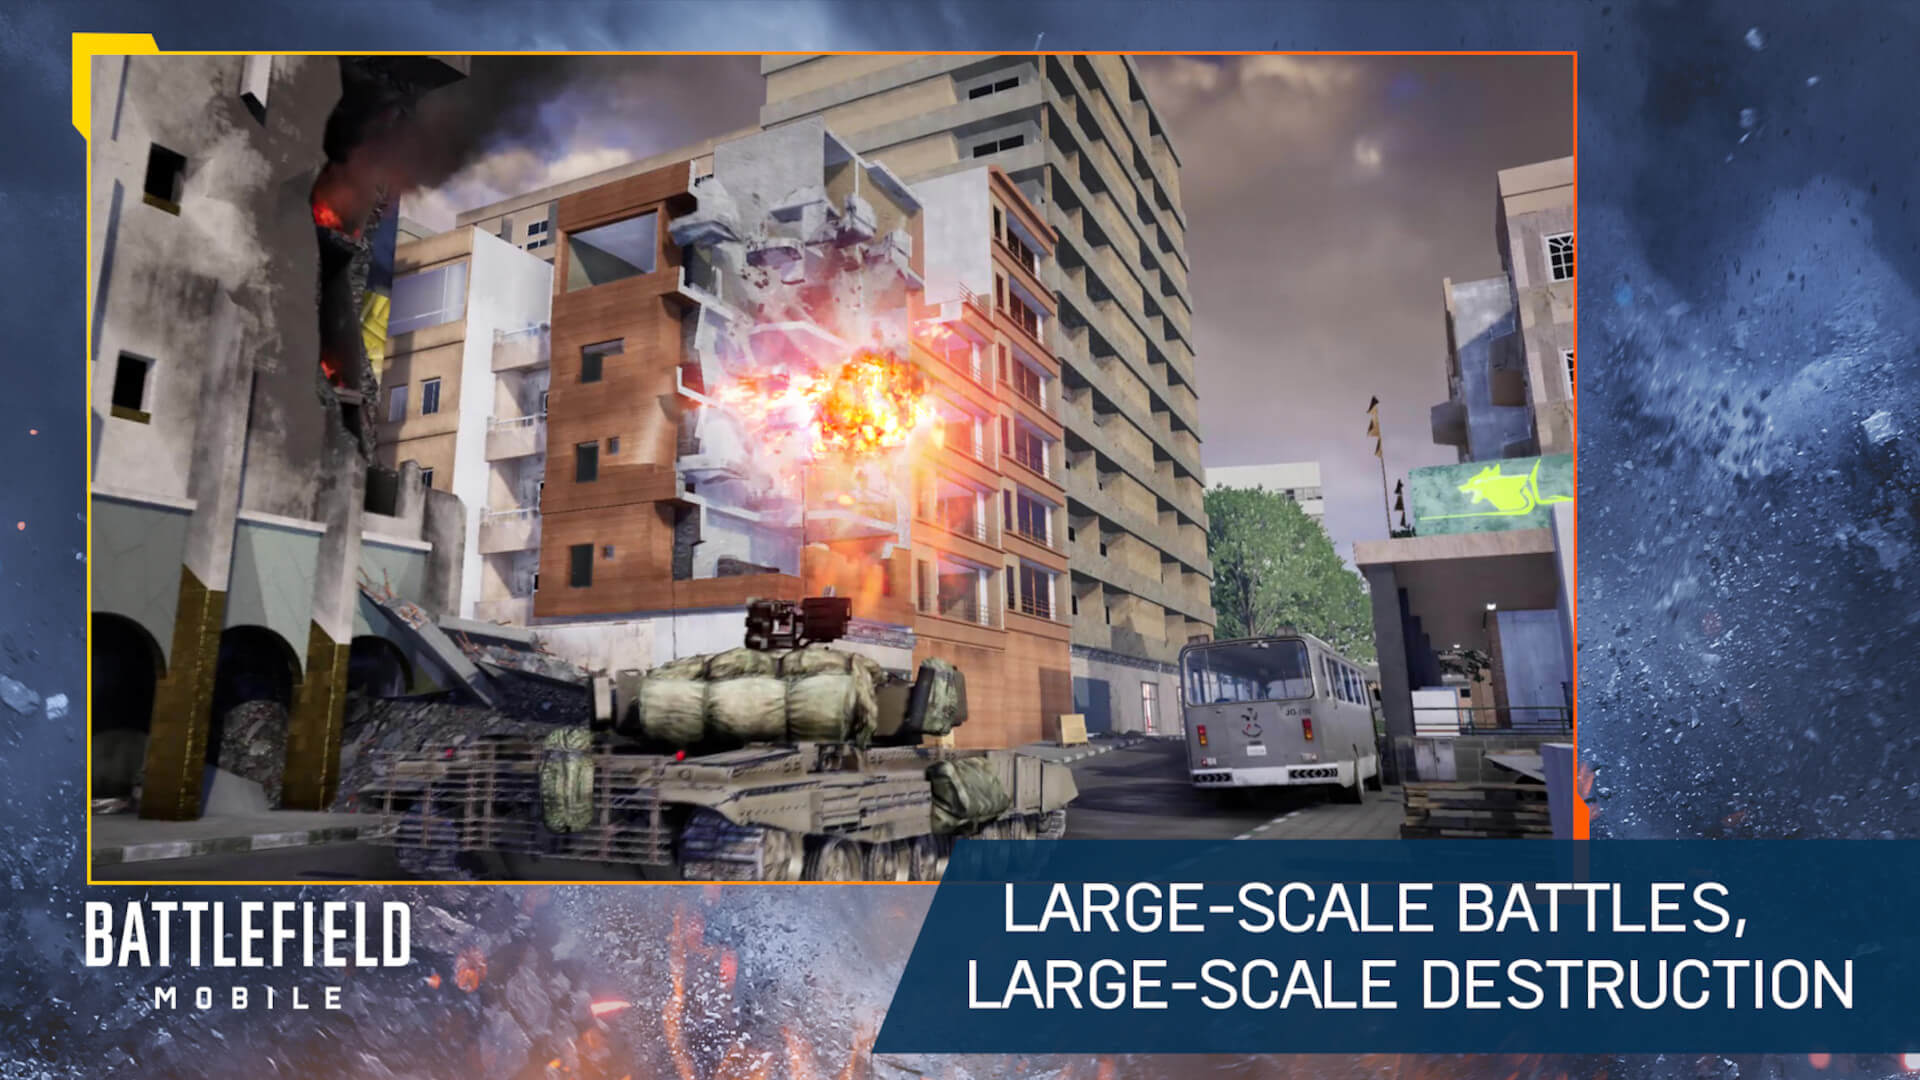 A teaser promising large-scale battles in Battlefield Mobile